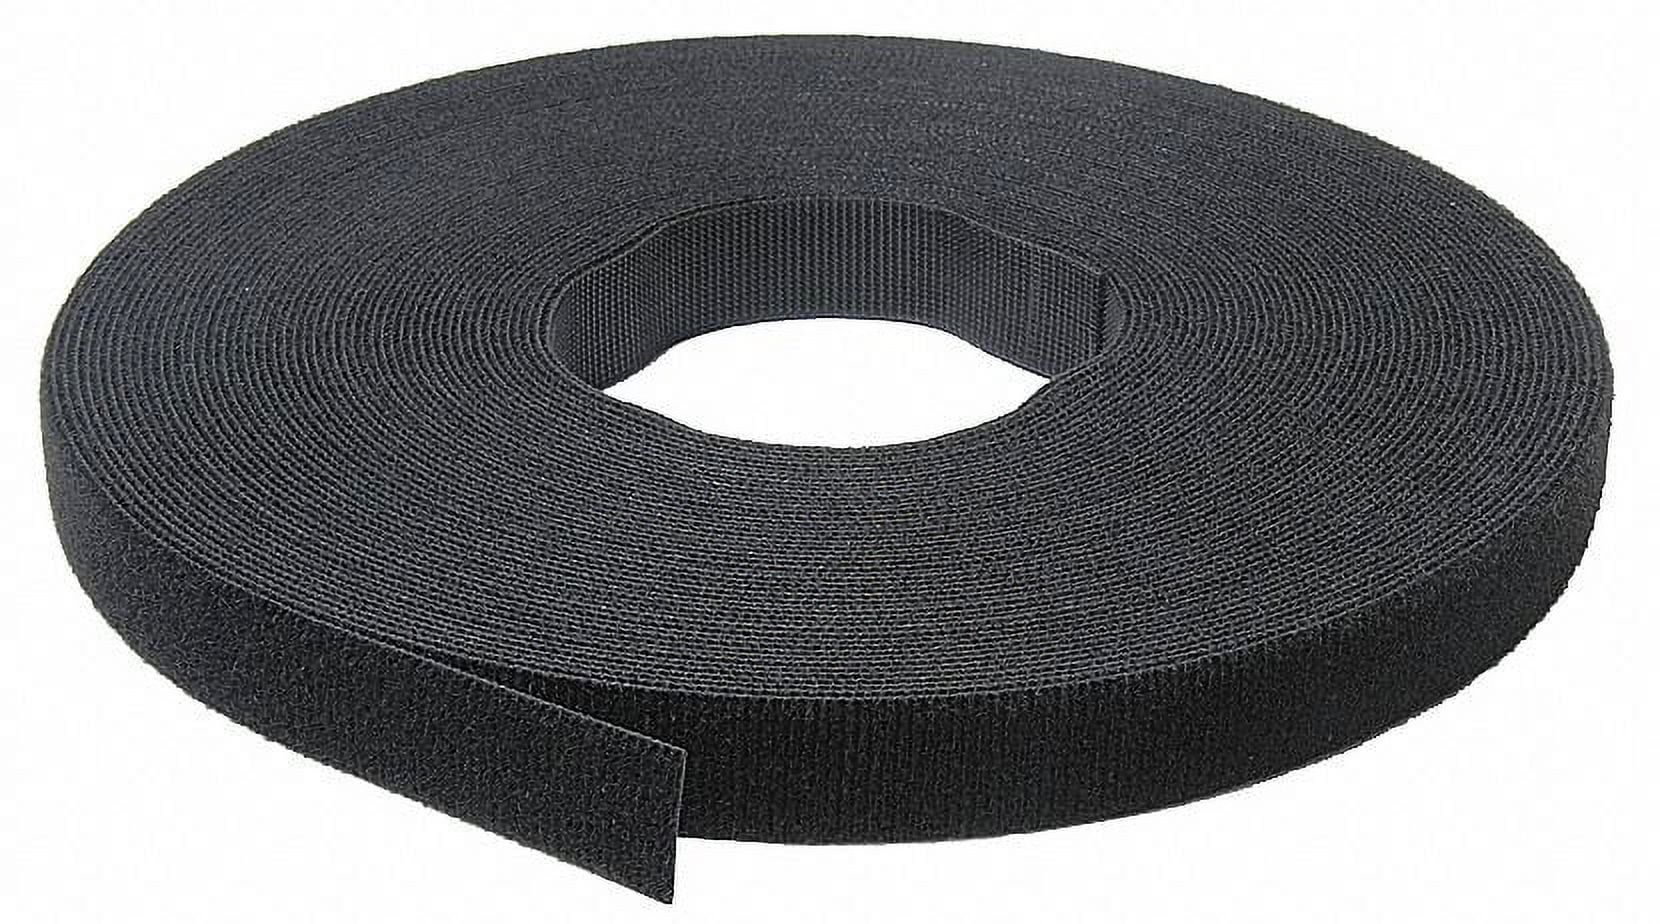 Velcro Brand Hook-and-Loop Cable Tie Roll,75 ft,Black 189590